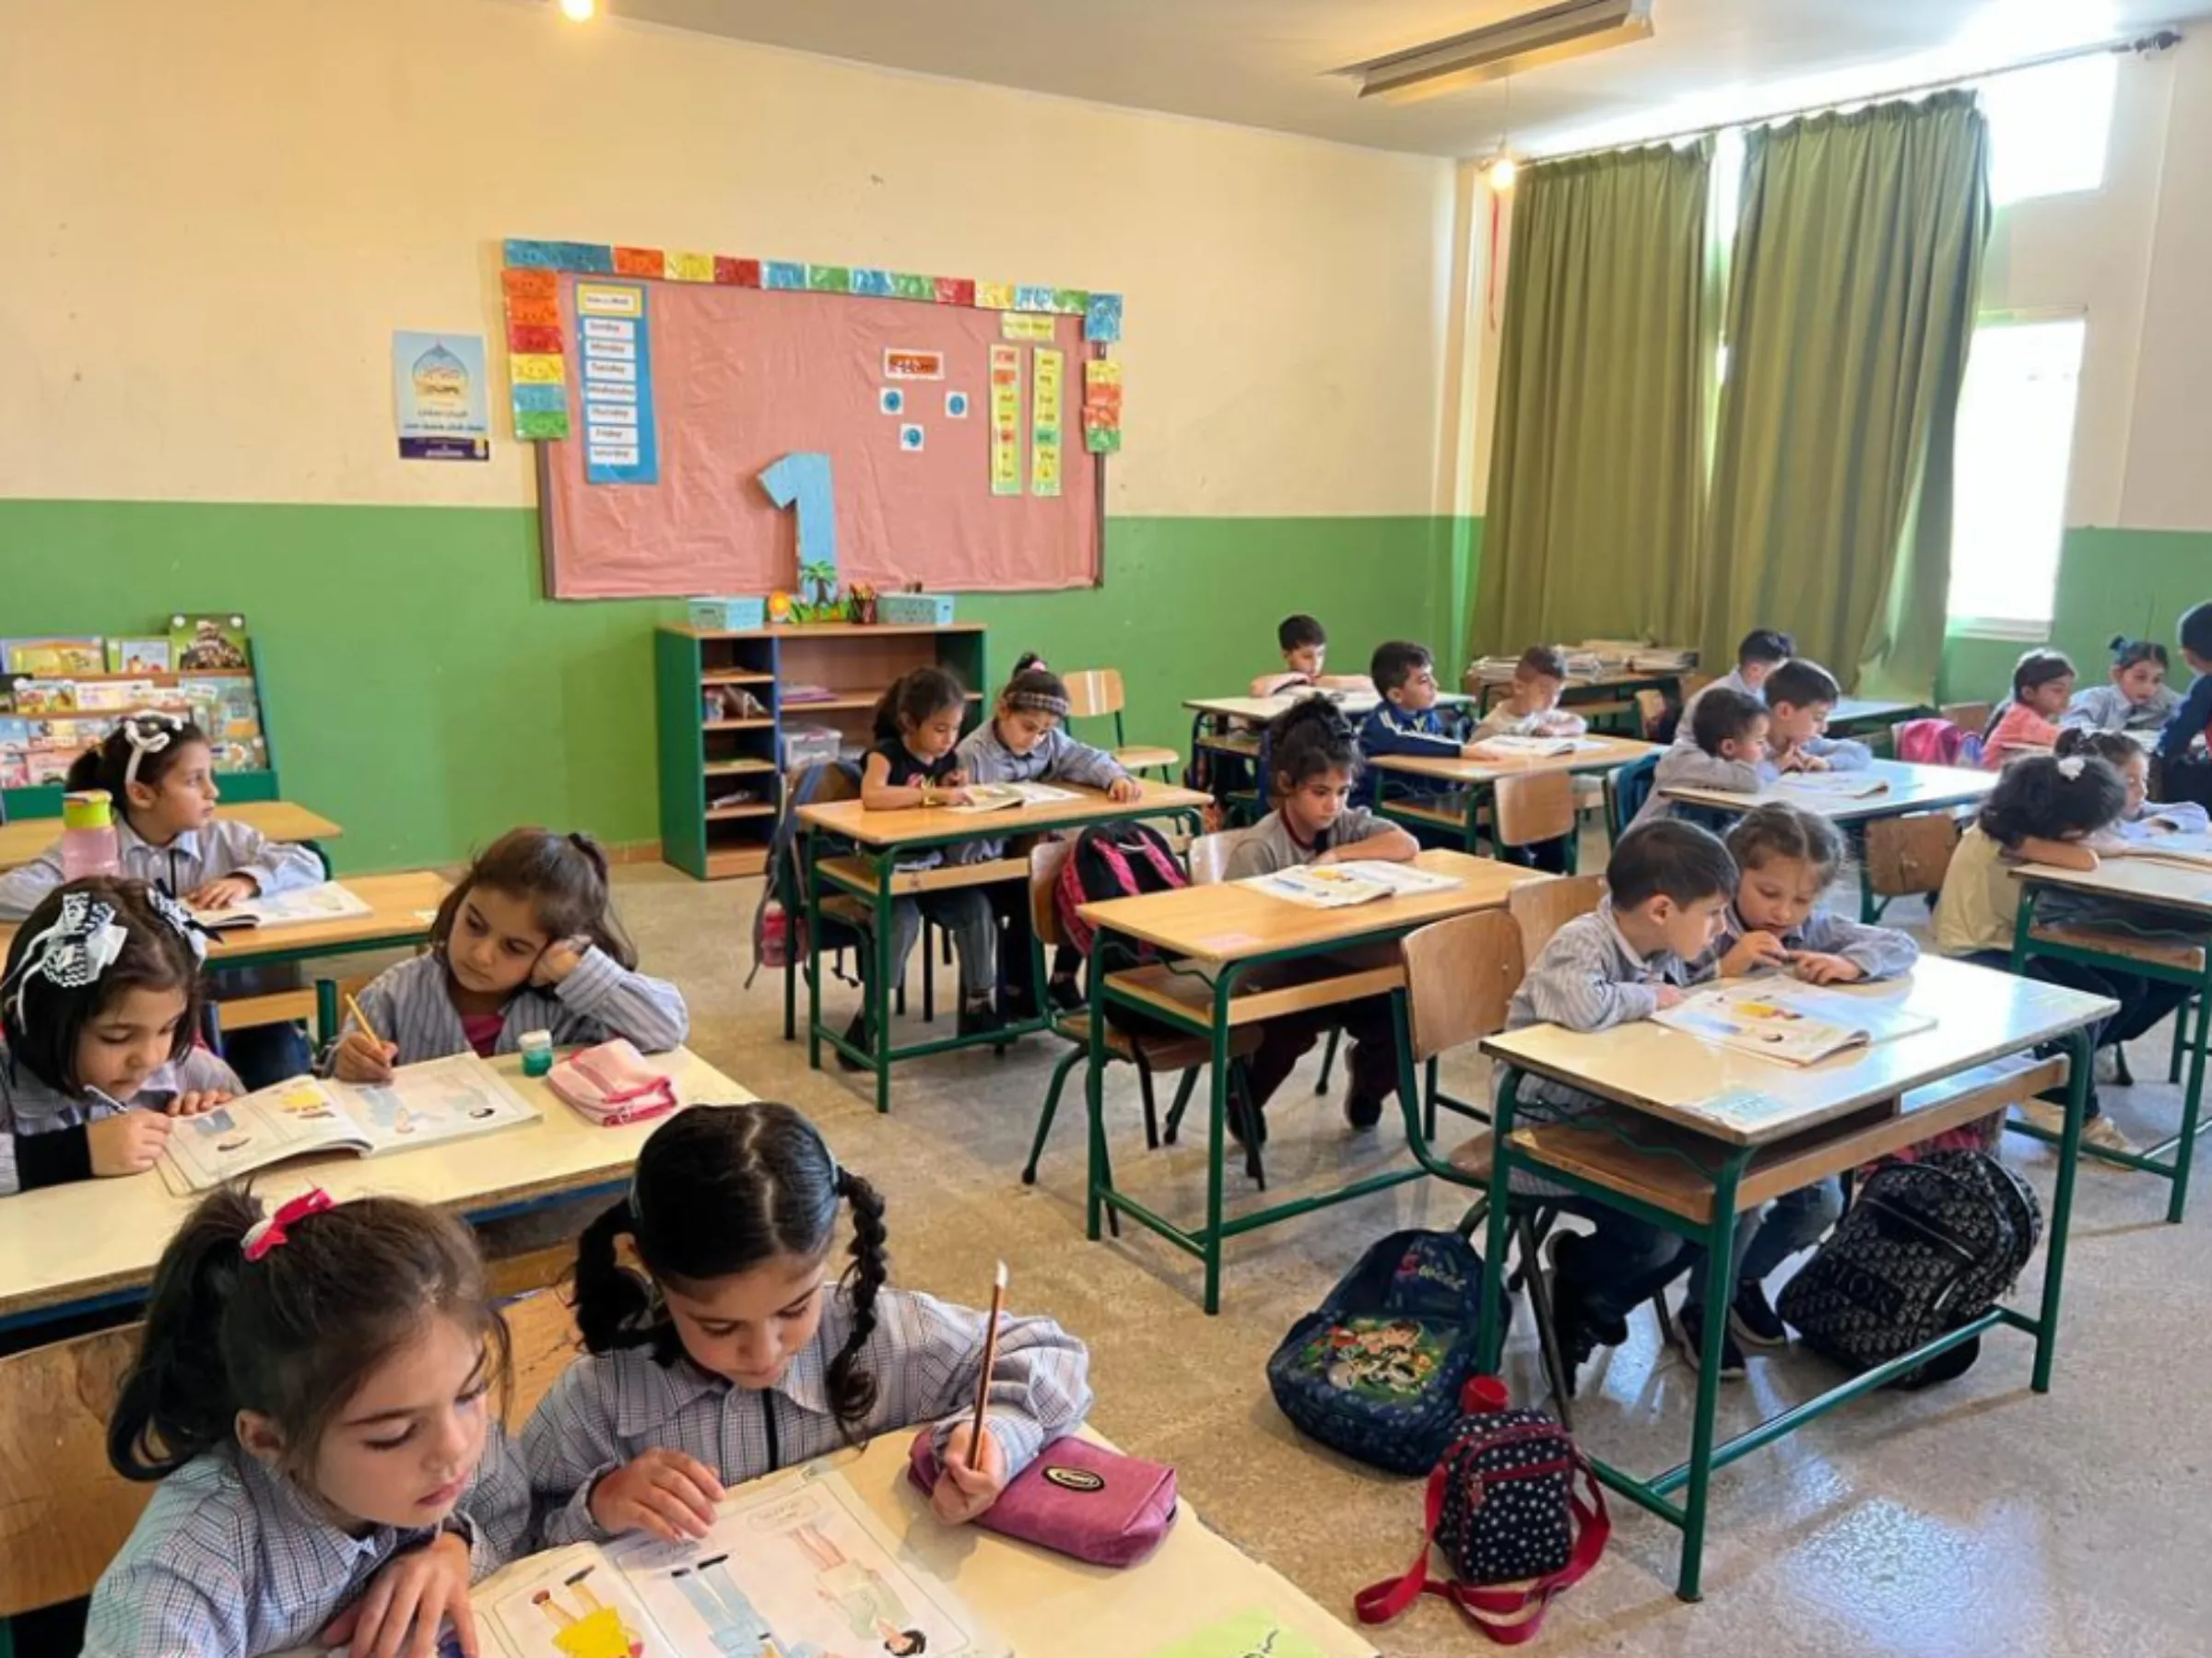 Students at the International School of Lebanon doing exercises in a classroom during a science class. Beirut, Lebanon on October 2022